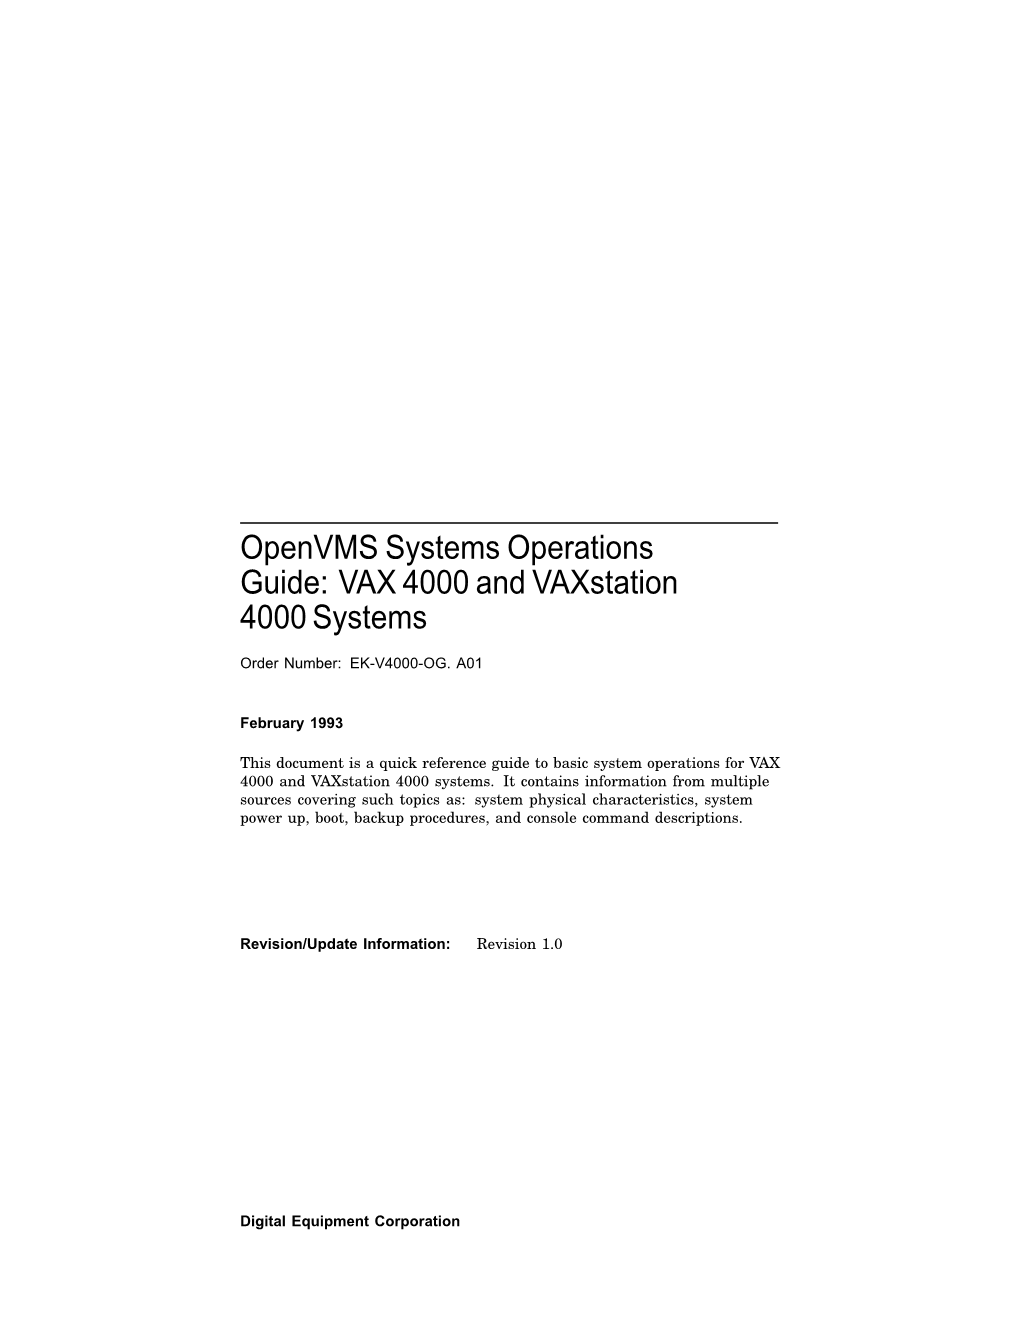 Openvms Systems Operations Guide: VAX 4000 and Vaxstation 4000 Systems